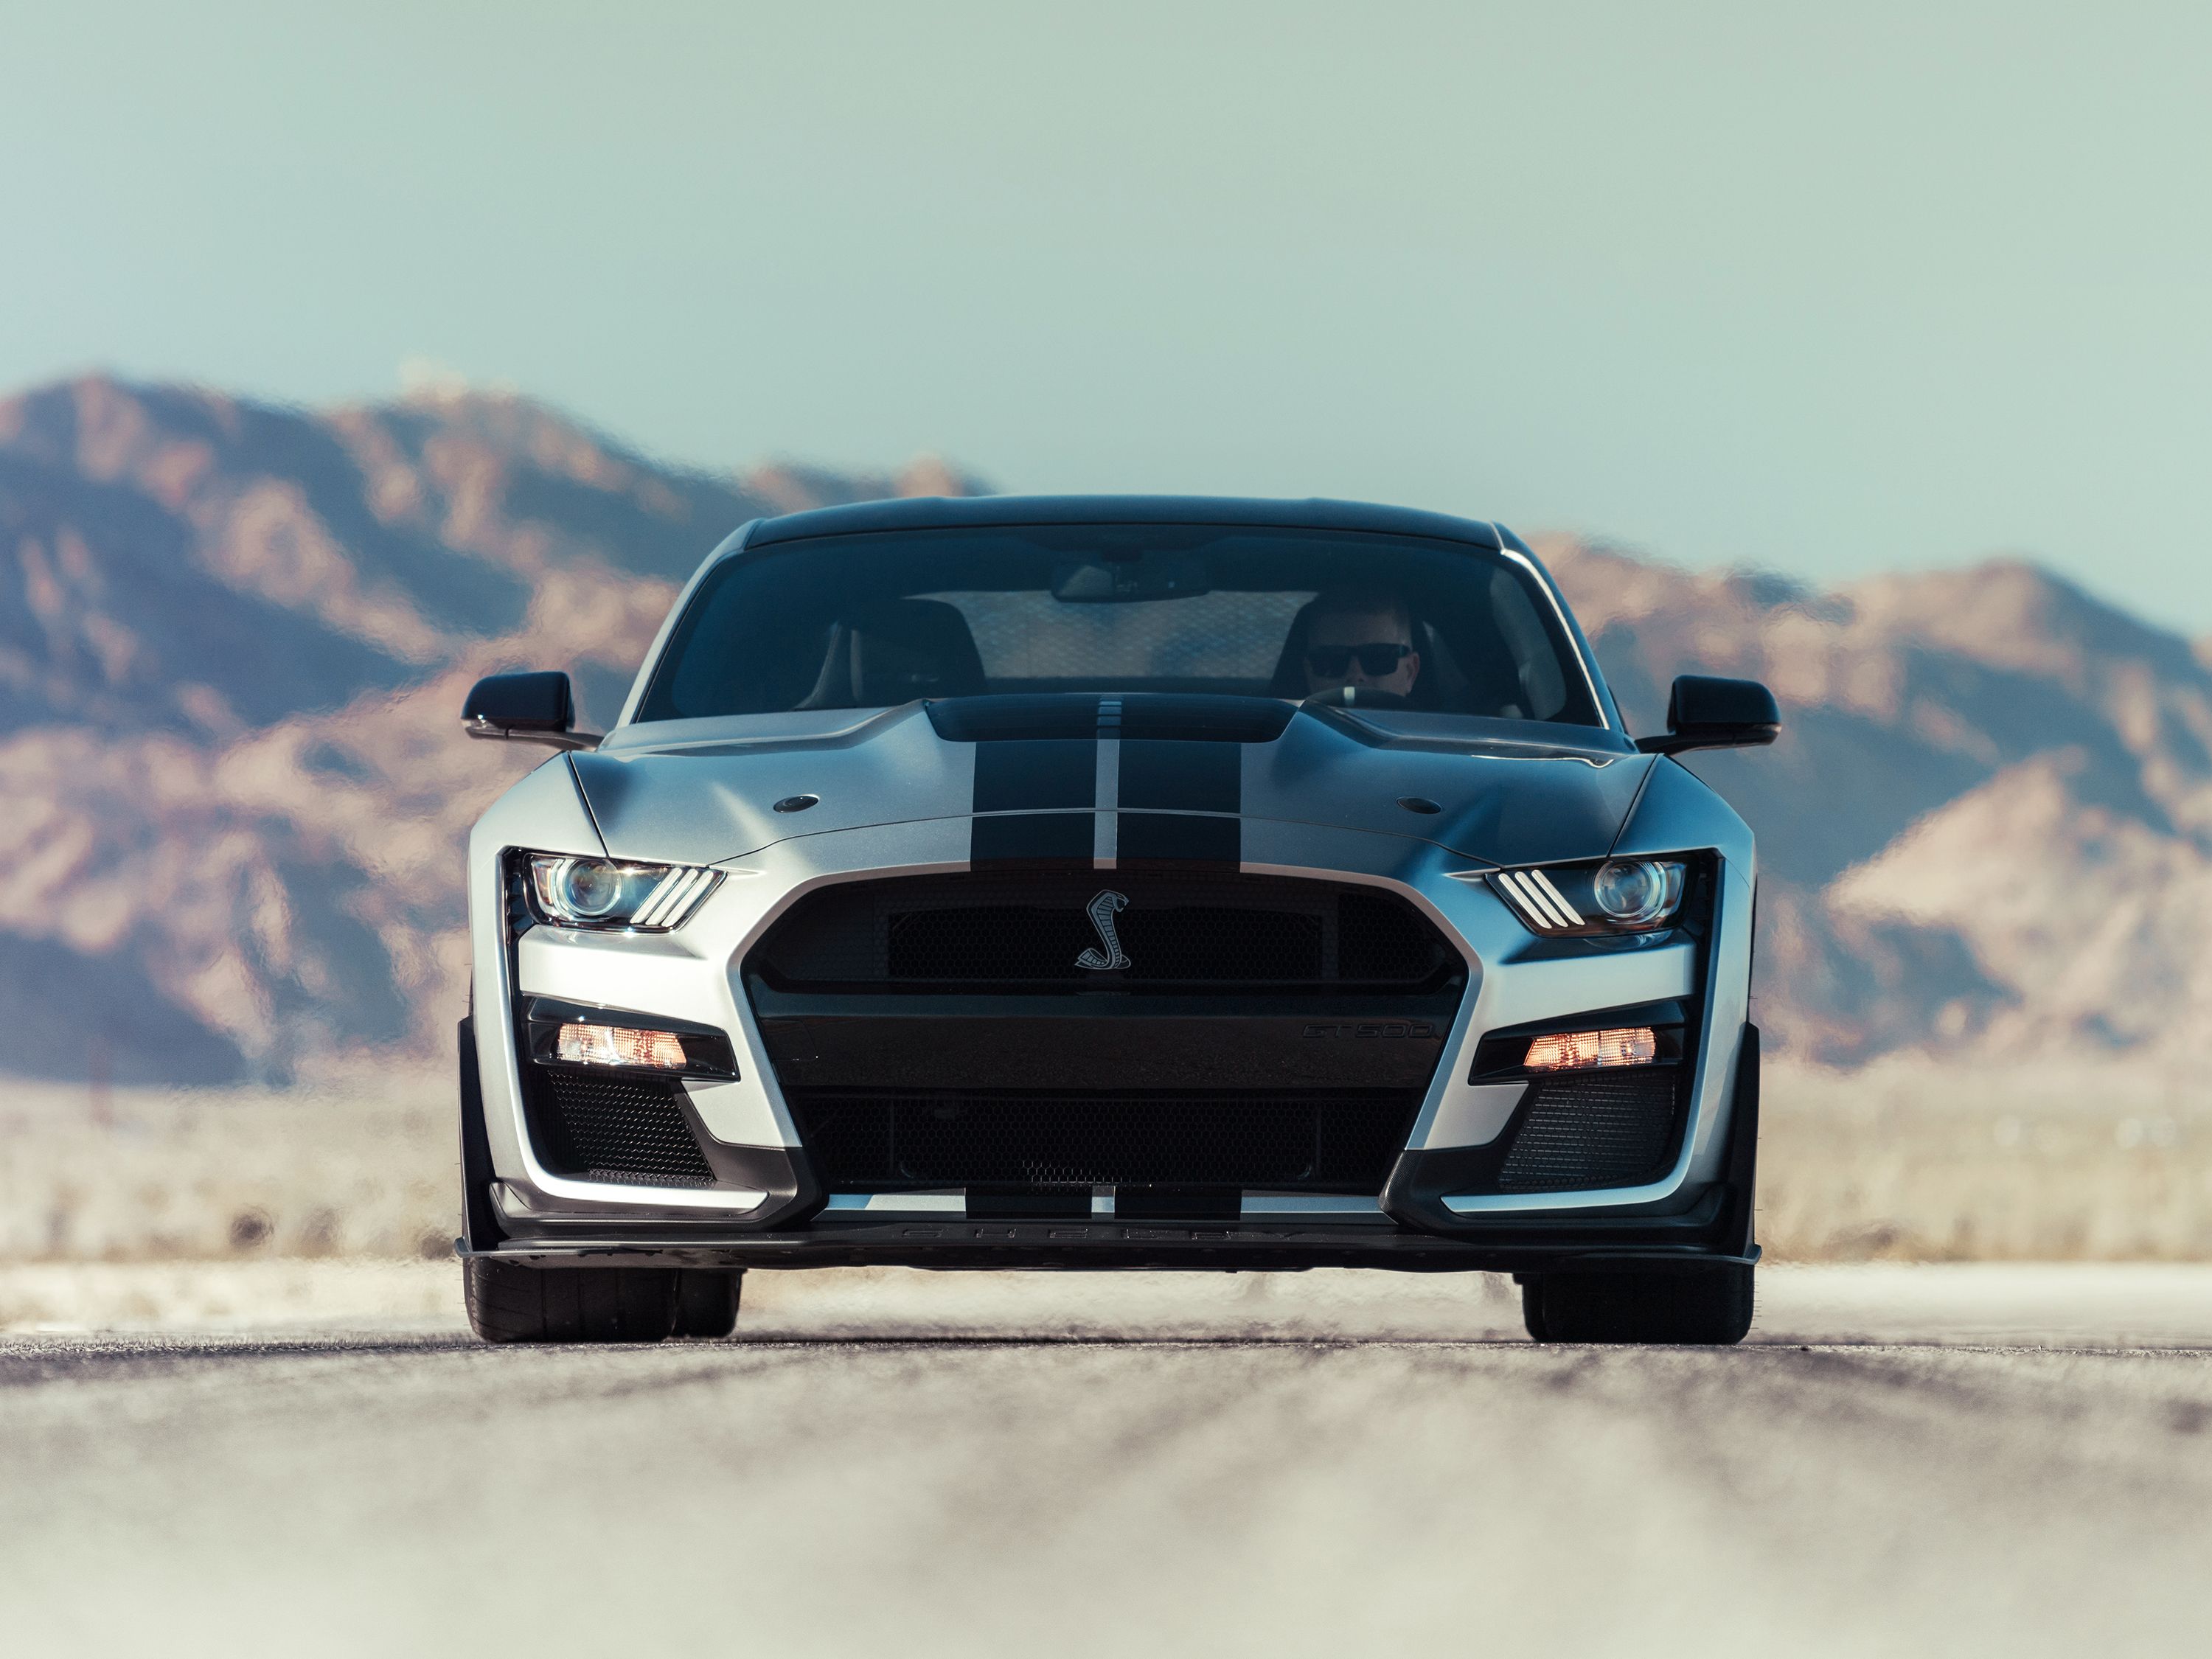 Unleash the Speed: Top 10 High-Performance Cars for Thrill-Seekers - Ford Mustang Shelby GT500: American muscle with modern performance